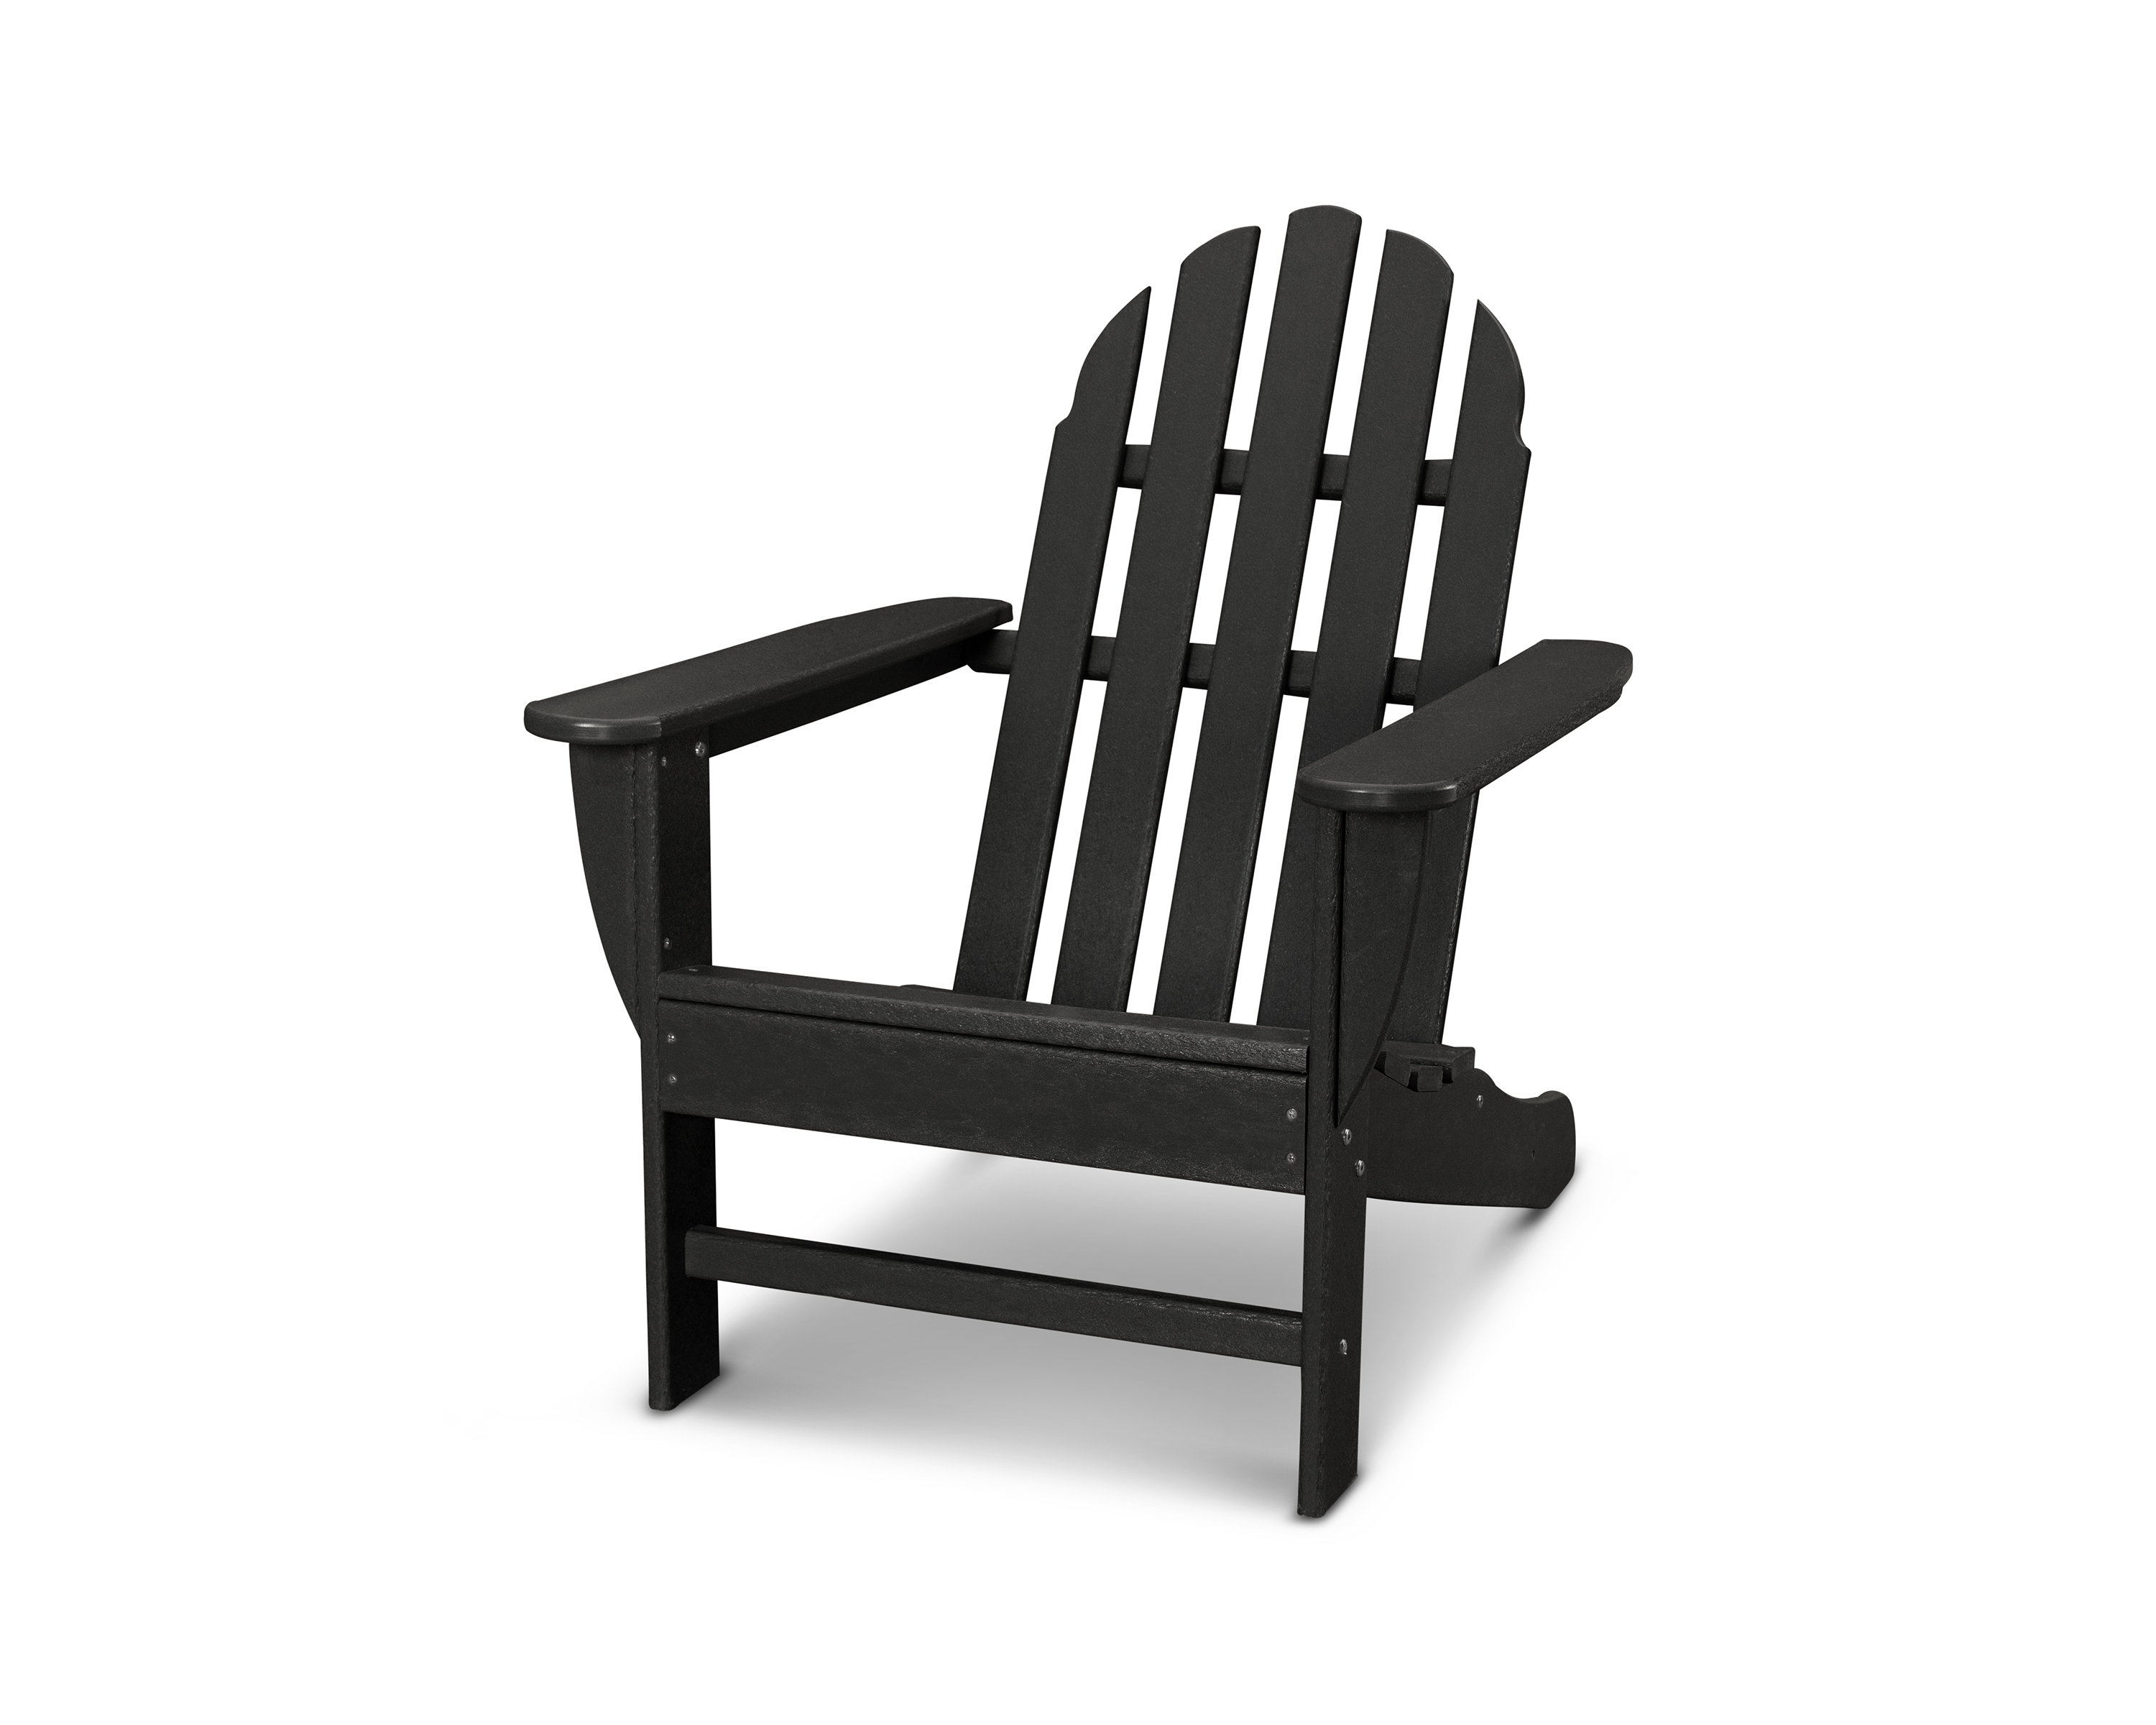 classic adirondack chair in black product image